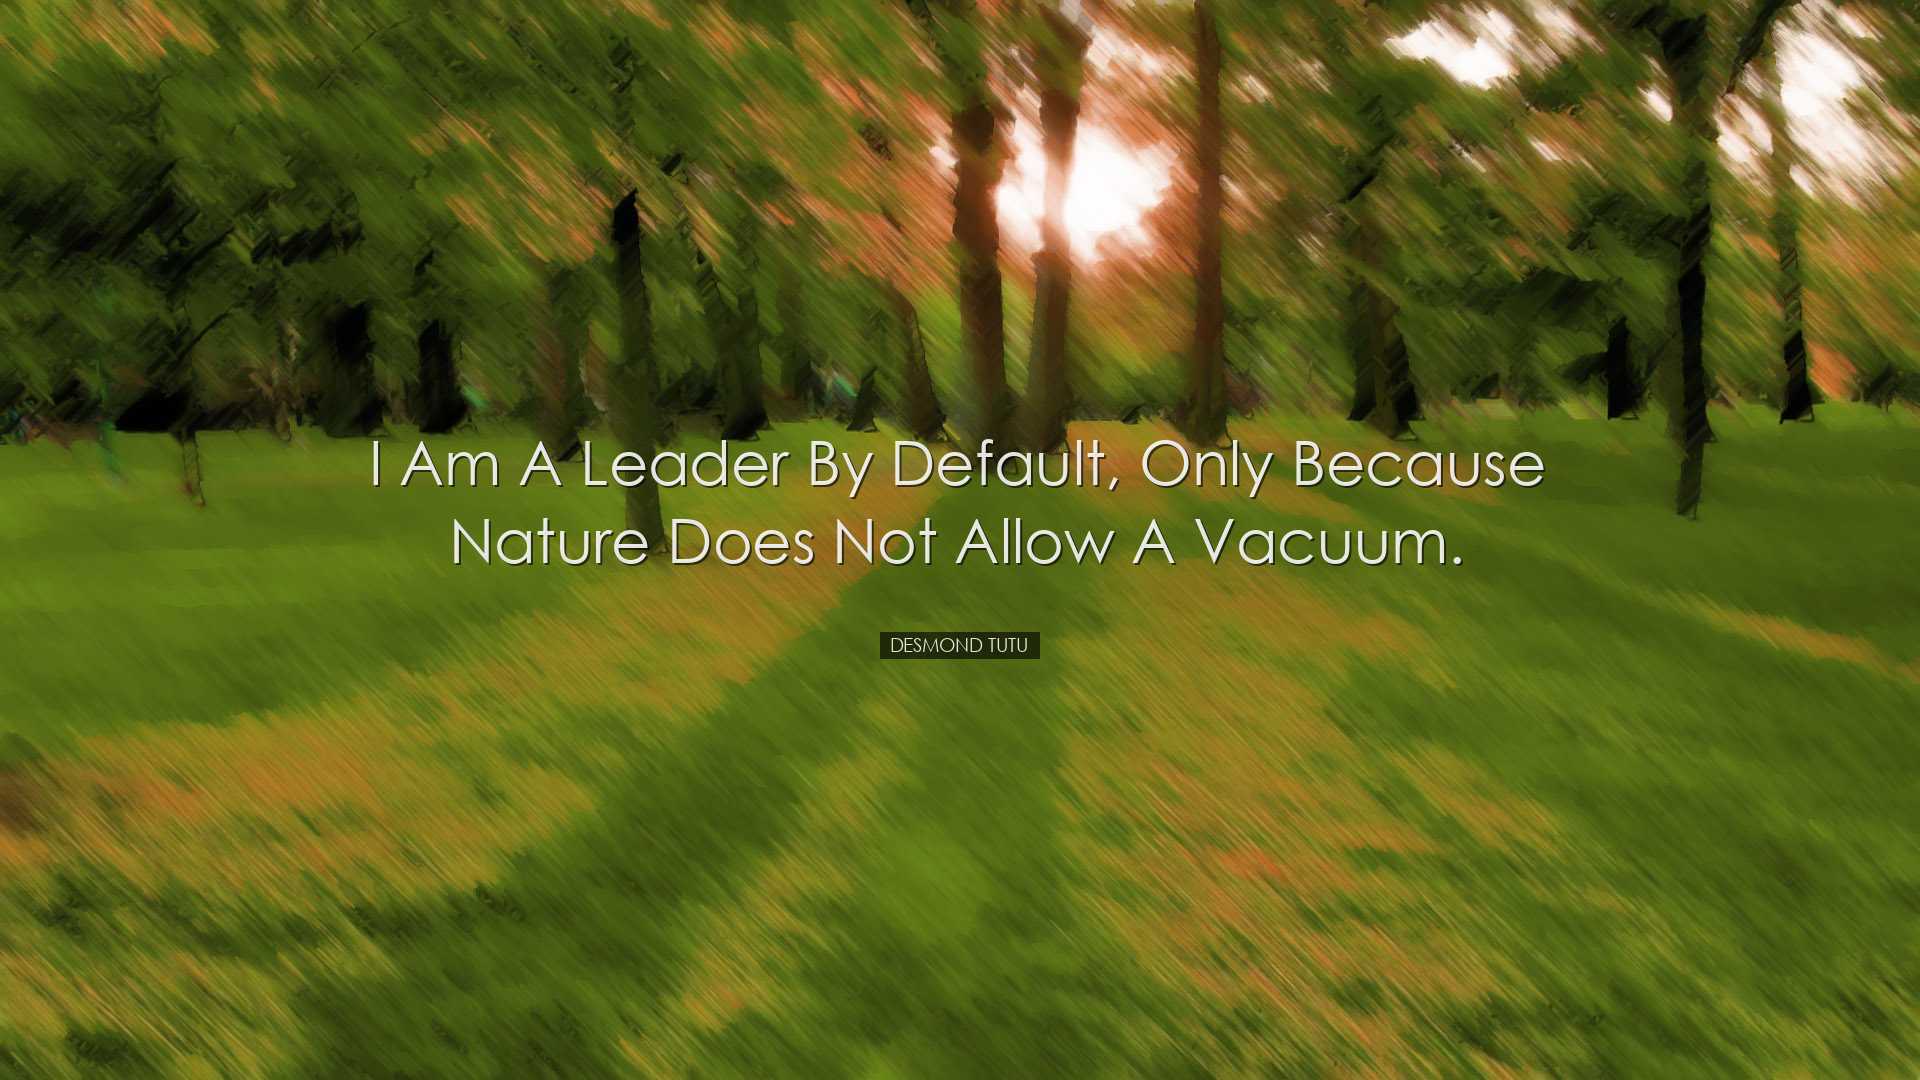 I am a leader by default, only because nature does not allow a vac